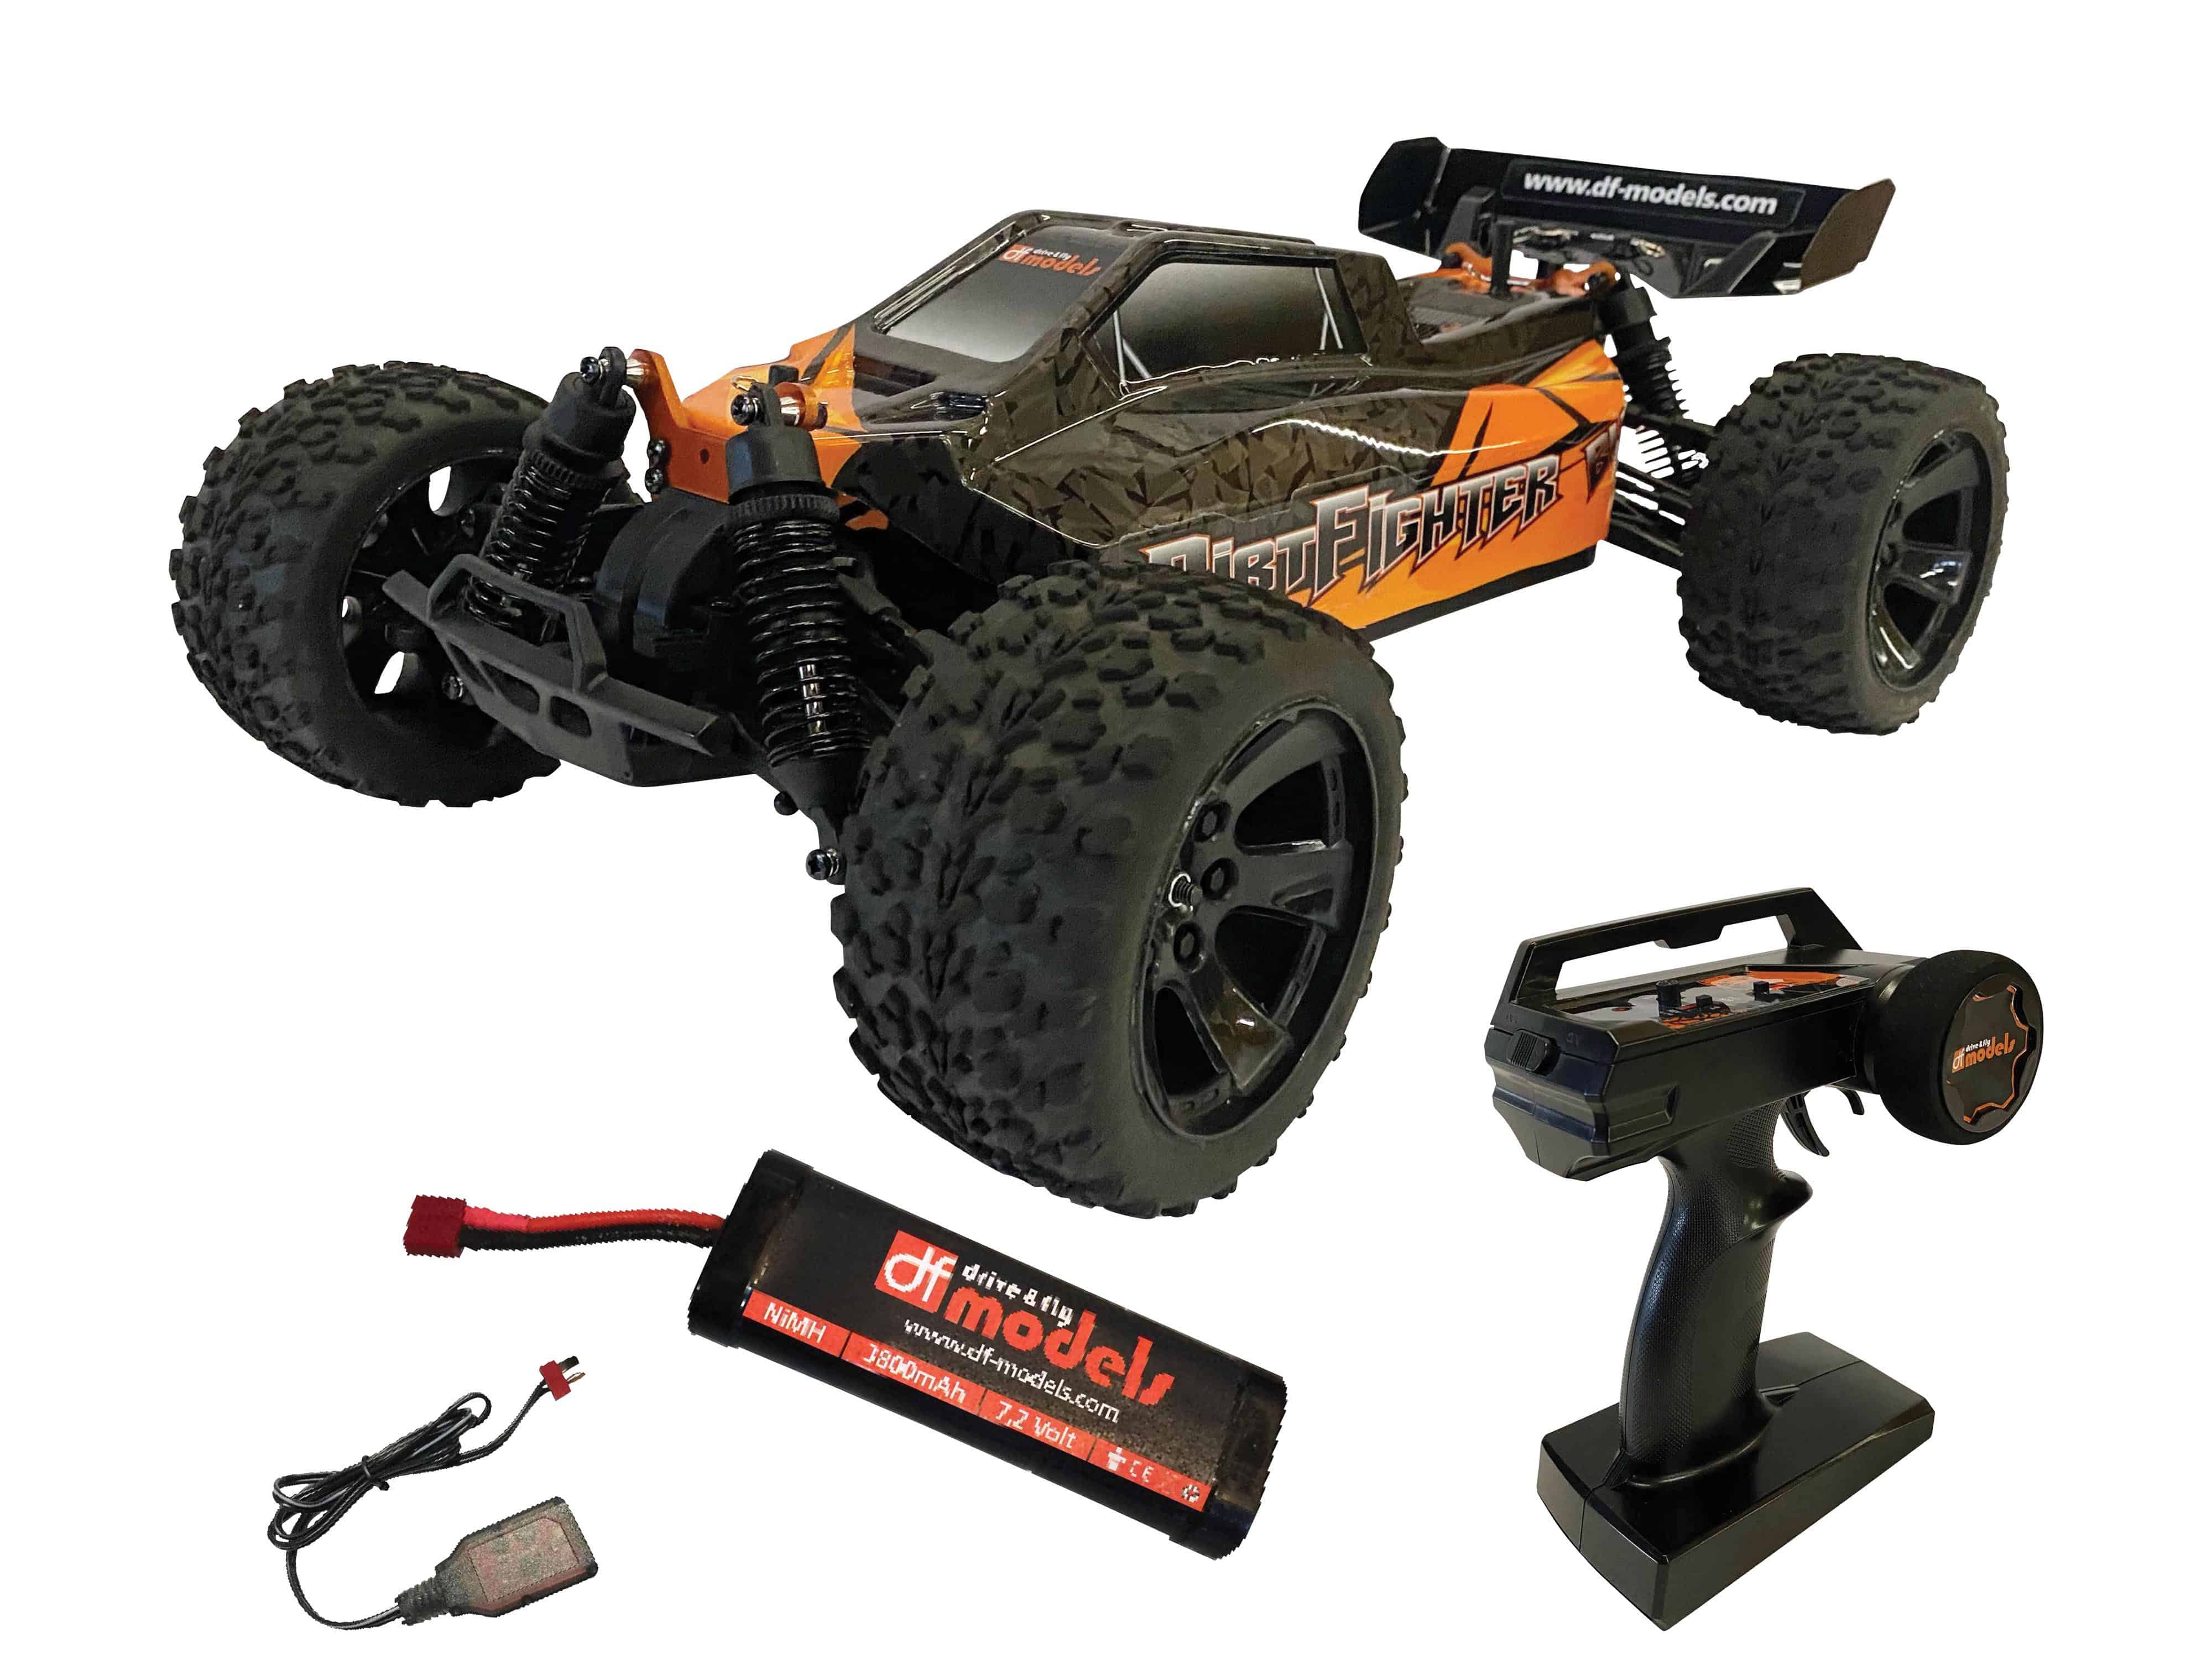 DF MODELS Buggy DirtFighter BY, 1:10 RTR, 4 WD, 3177